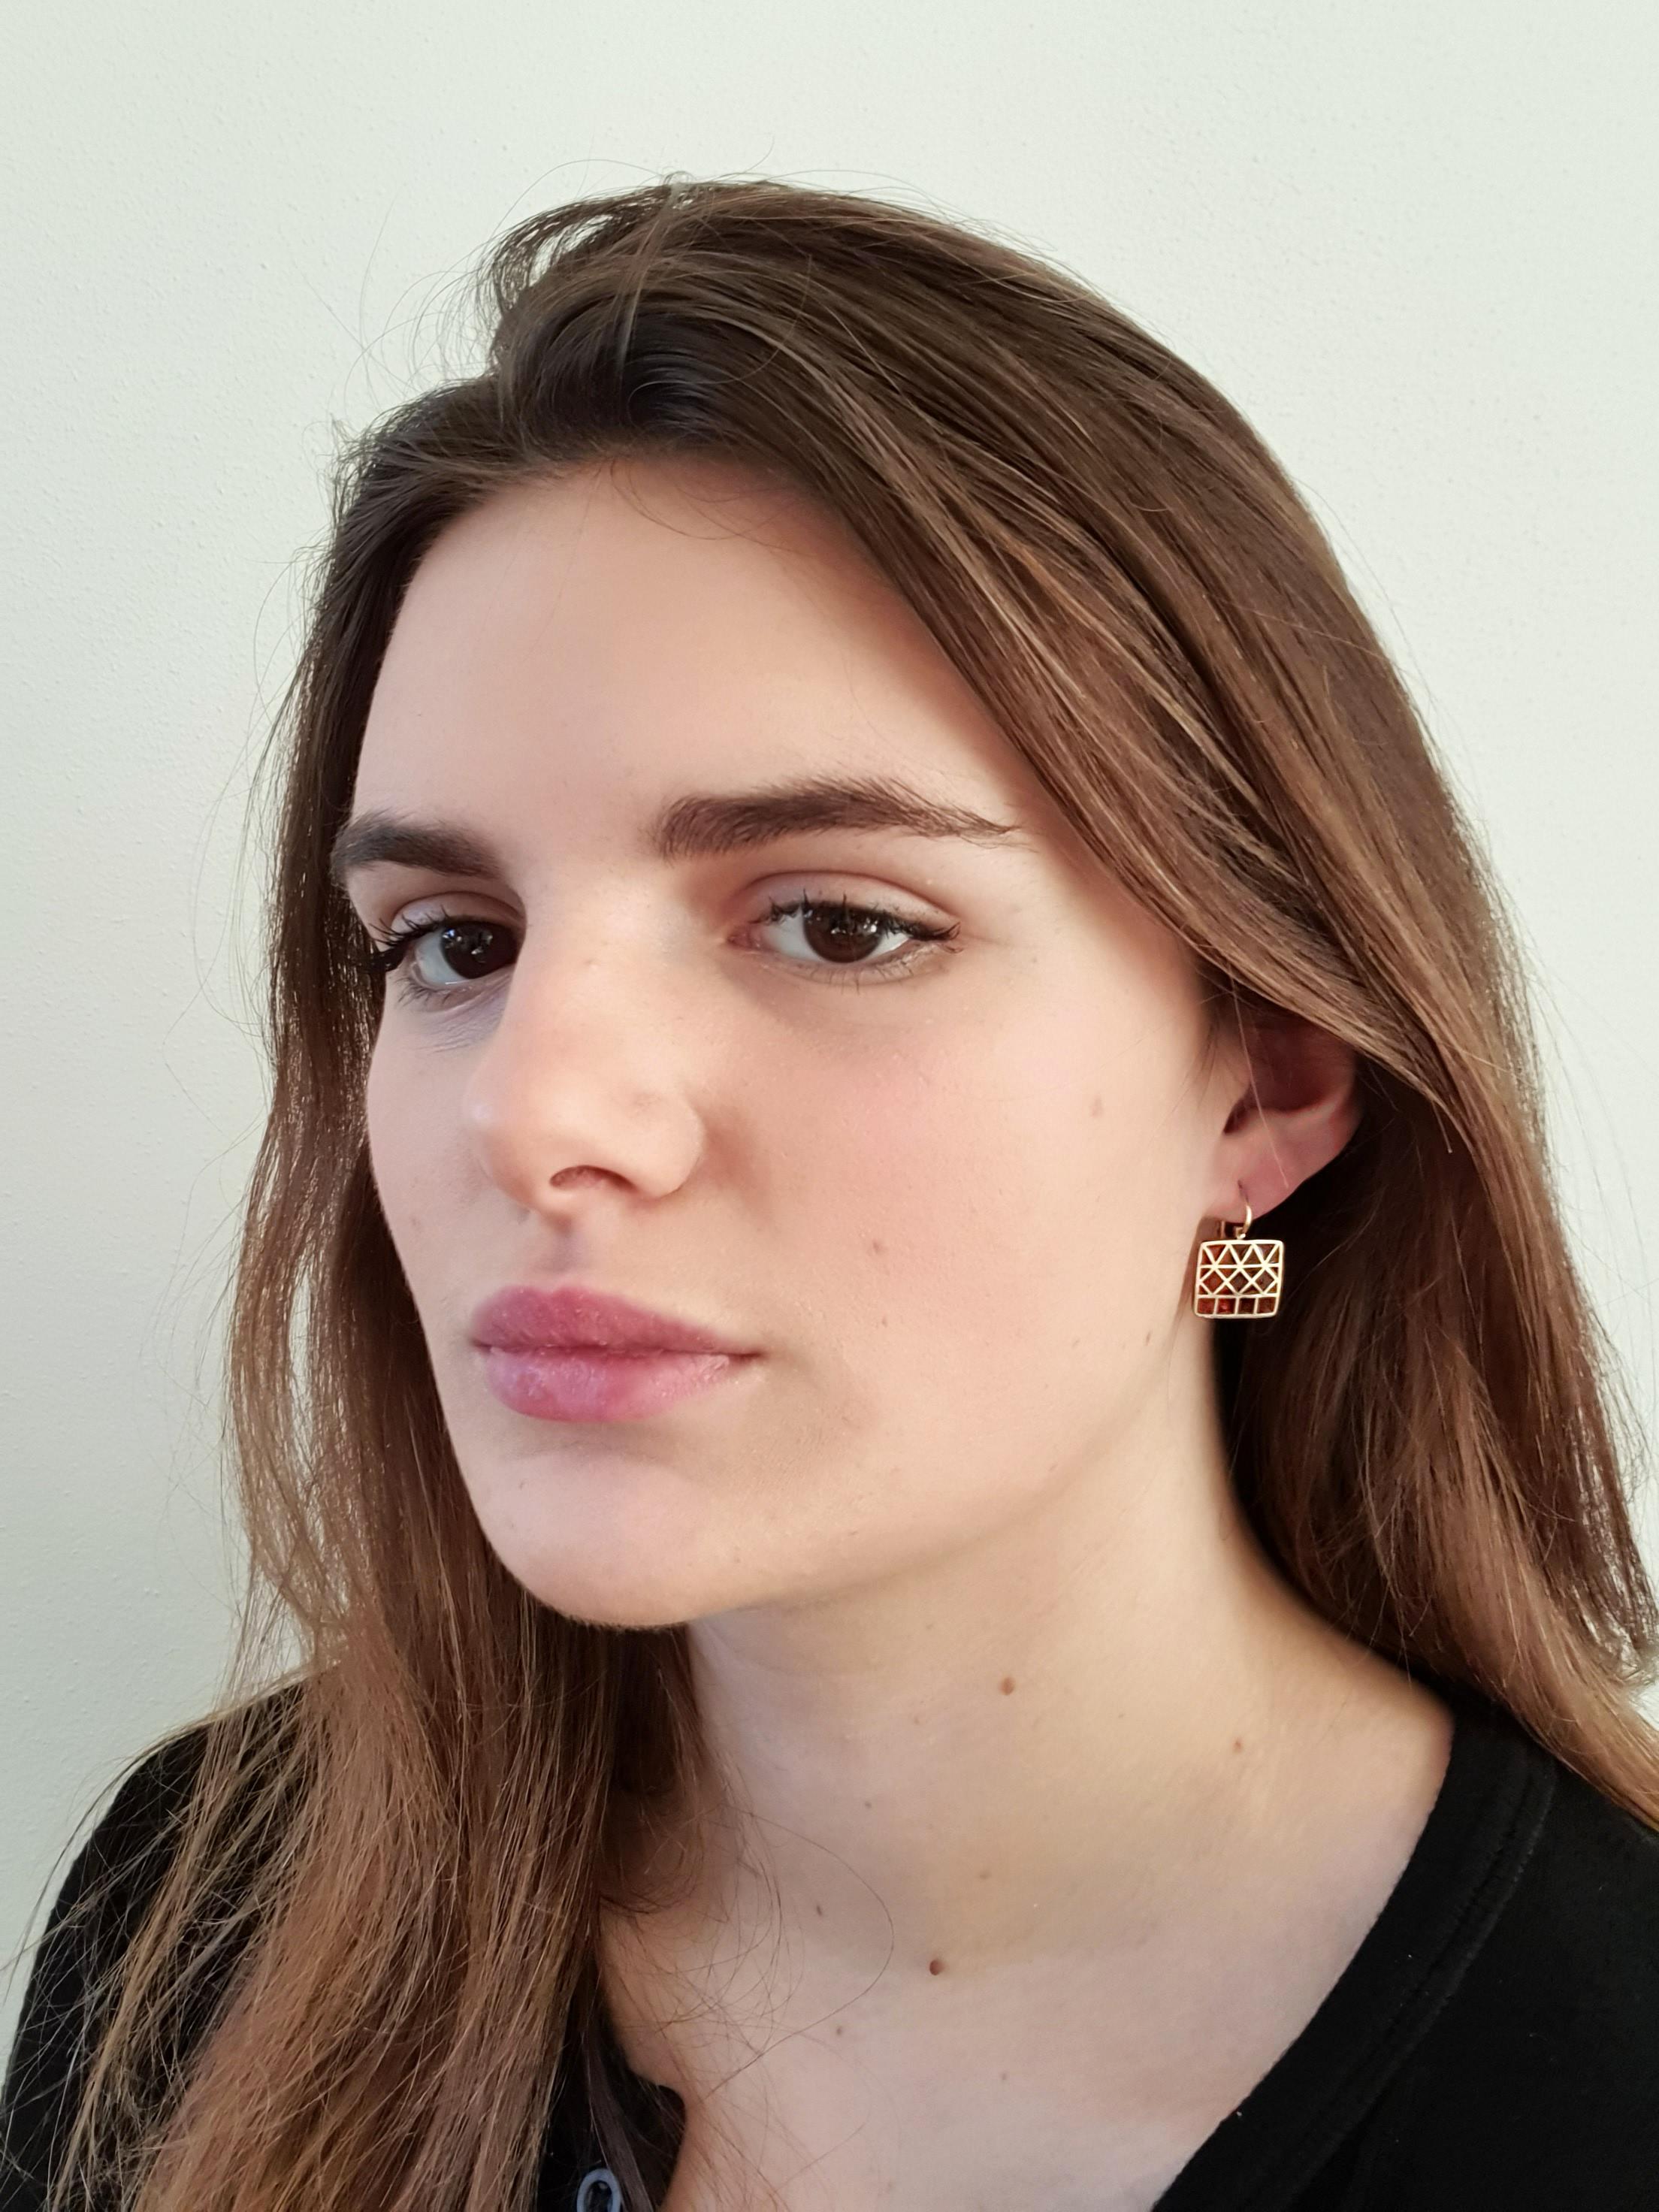 Dalben design plique a jour red fire enamel and 18 kt yellow gold earrings  inspired by Longobard jewelry.
Dimension:  
width 14,8 mm 
height without leverback 13,7 mm 
height with leverback 22 mm 
The earrings are completely hand made in our